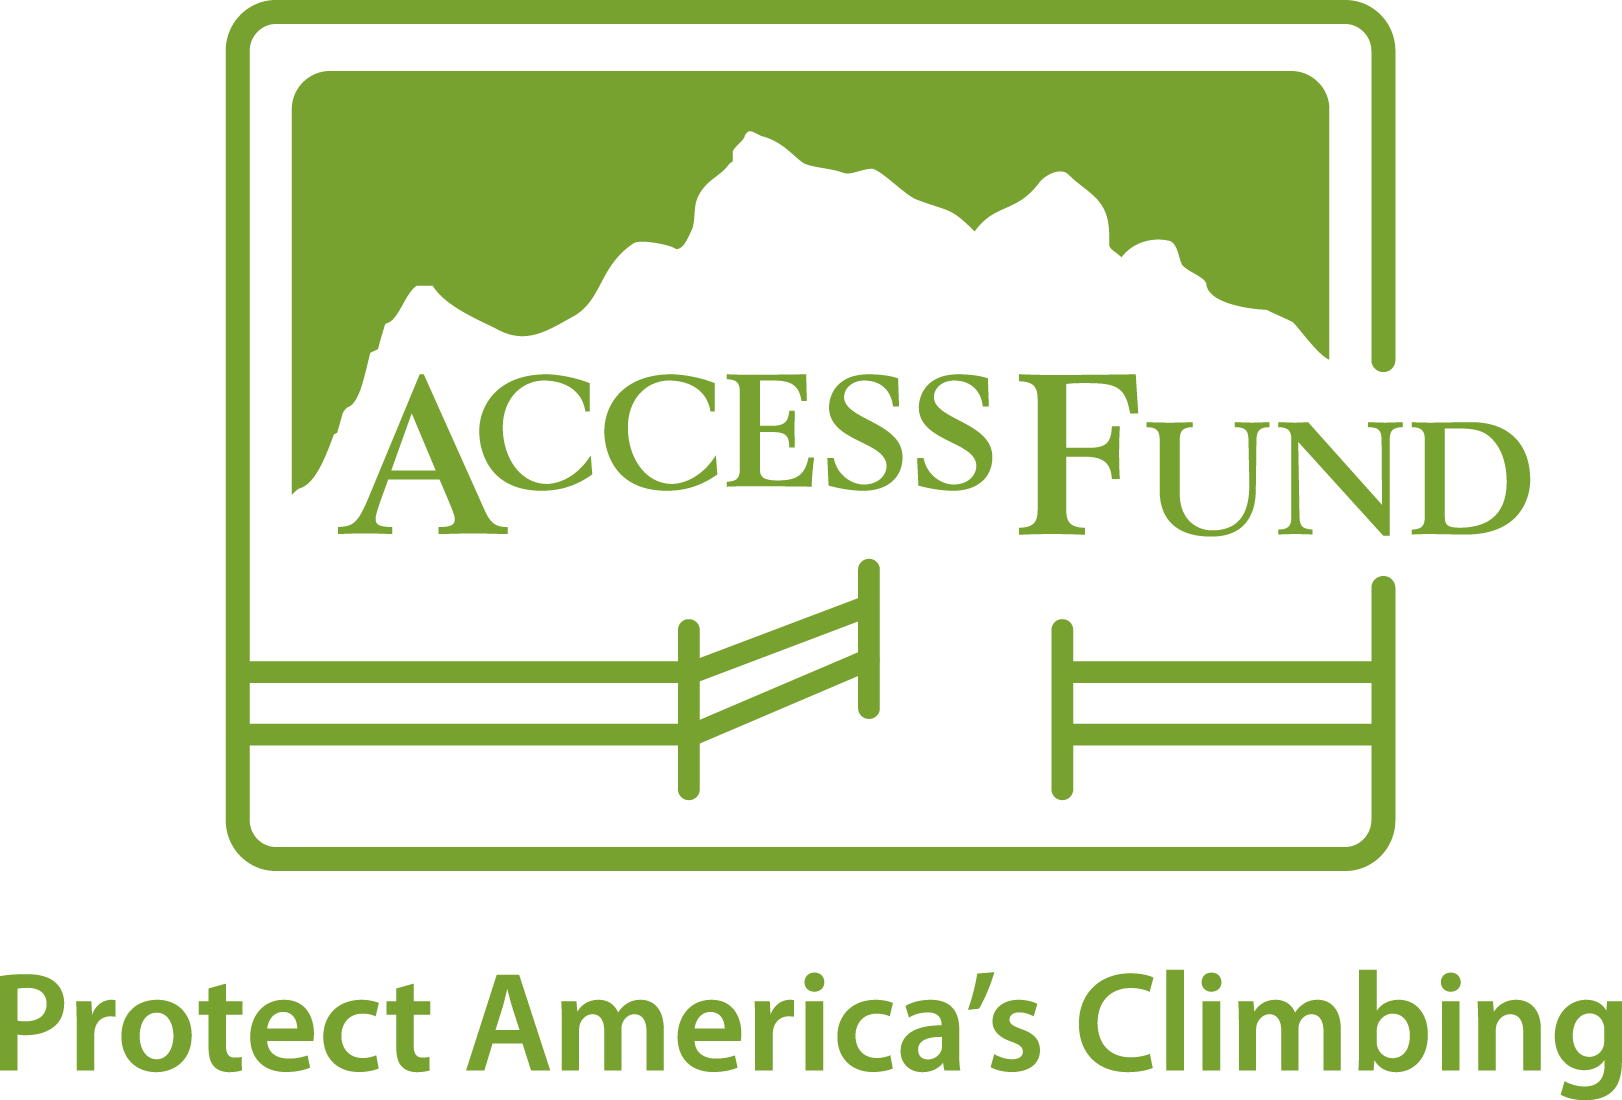 access fund - protect america's climbing